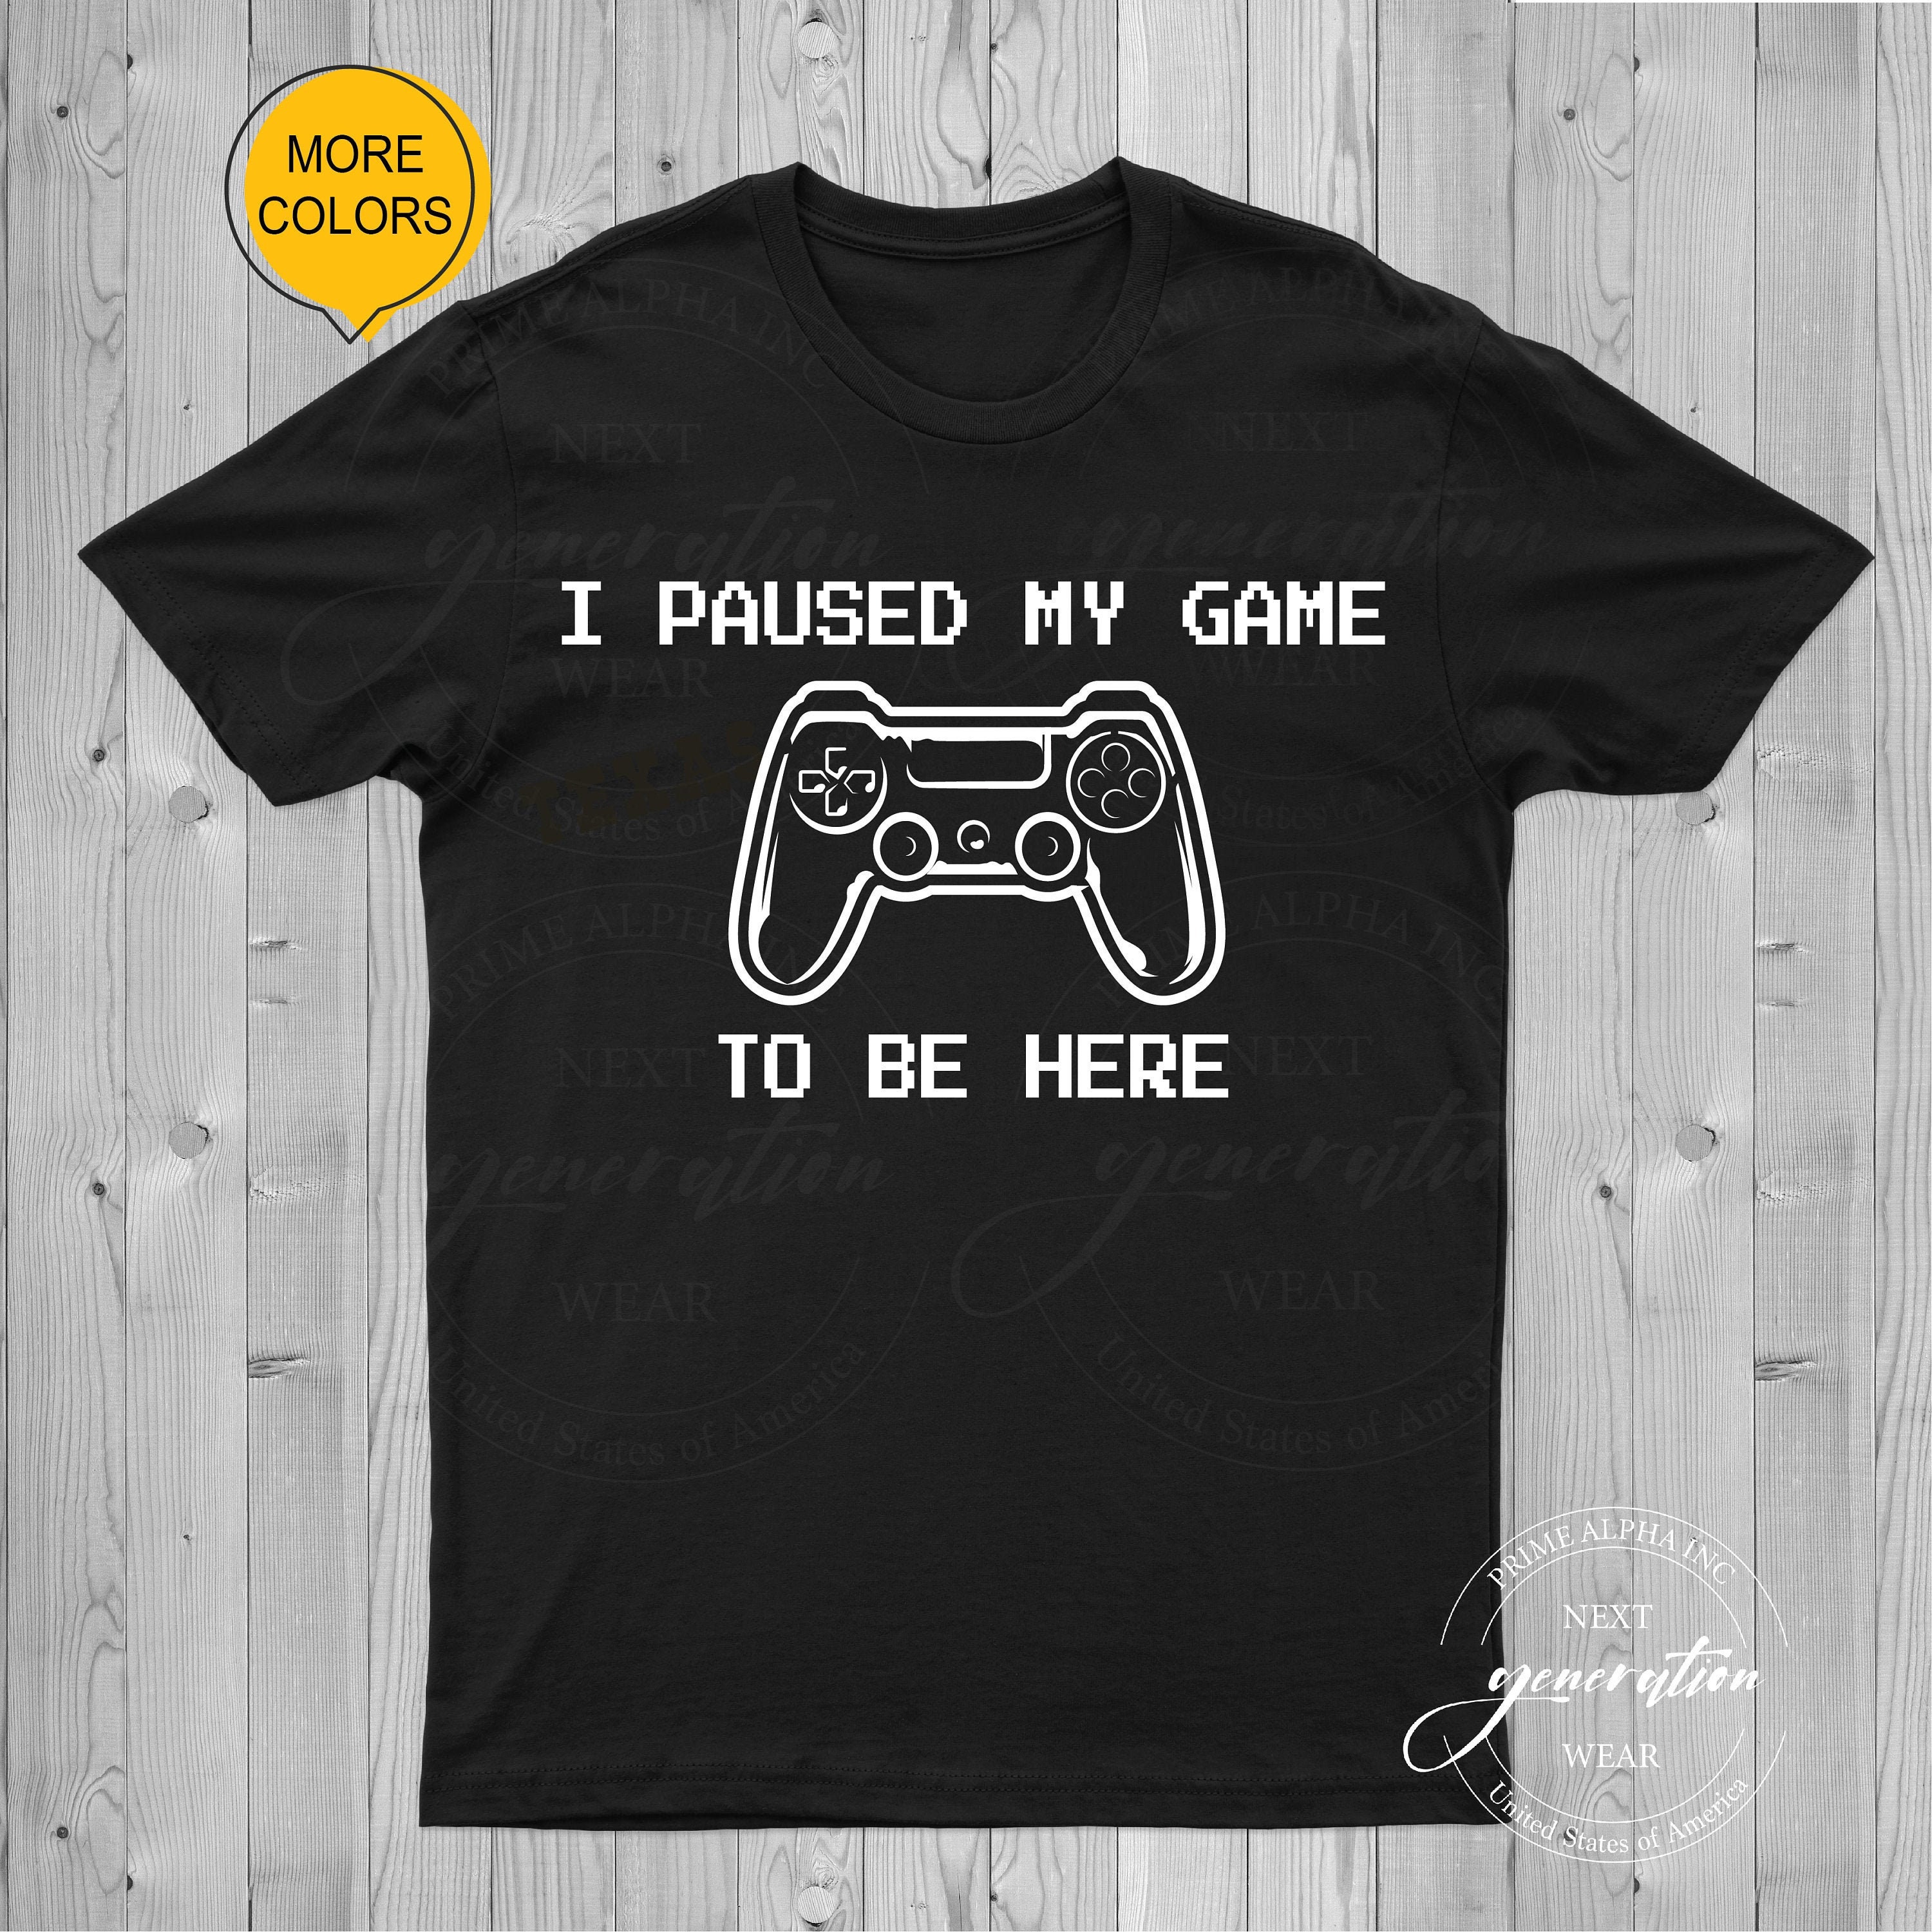 29. I Paused My Game To Be Here T-Shirt